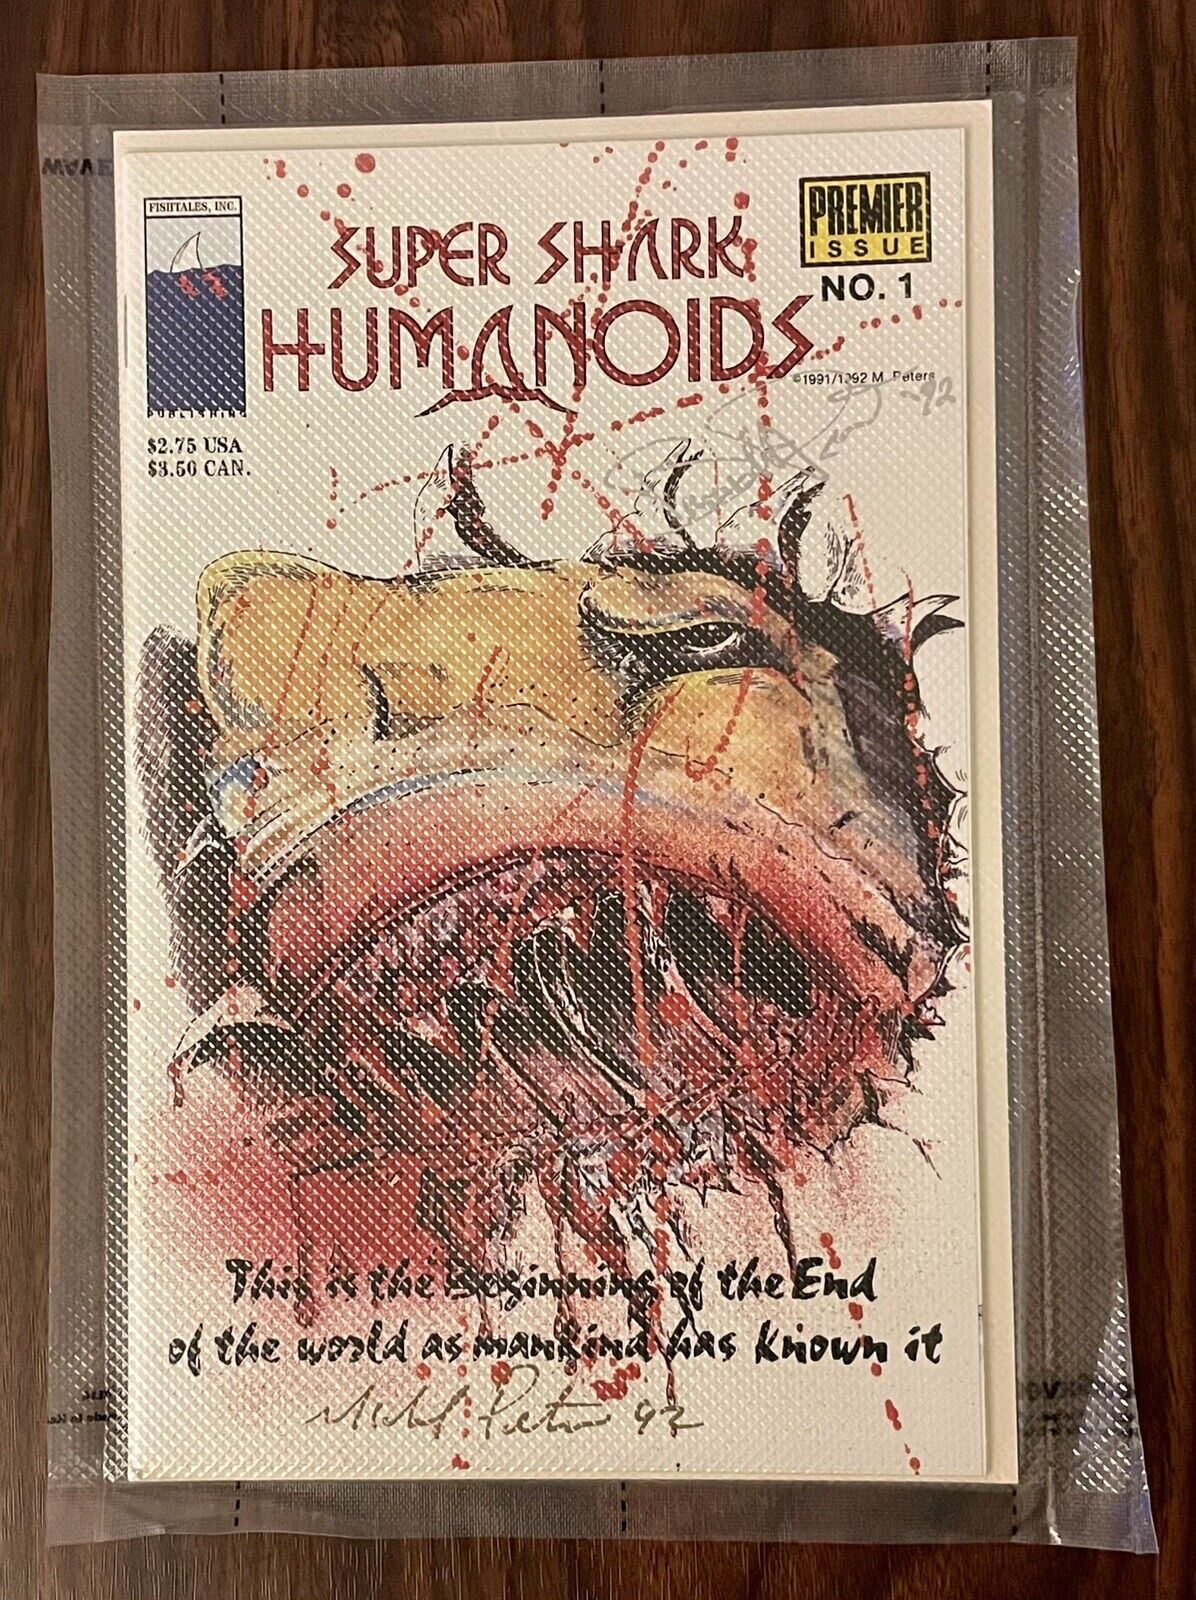 Fishtales Comic Super Shark Humanoids Issue #1 Signed By Michael & Brandt Peters